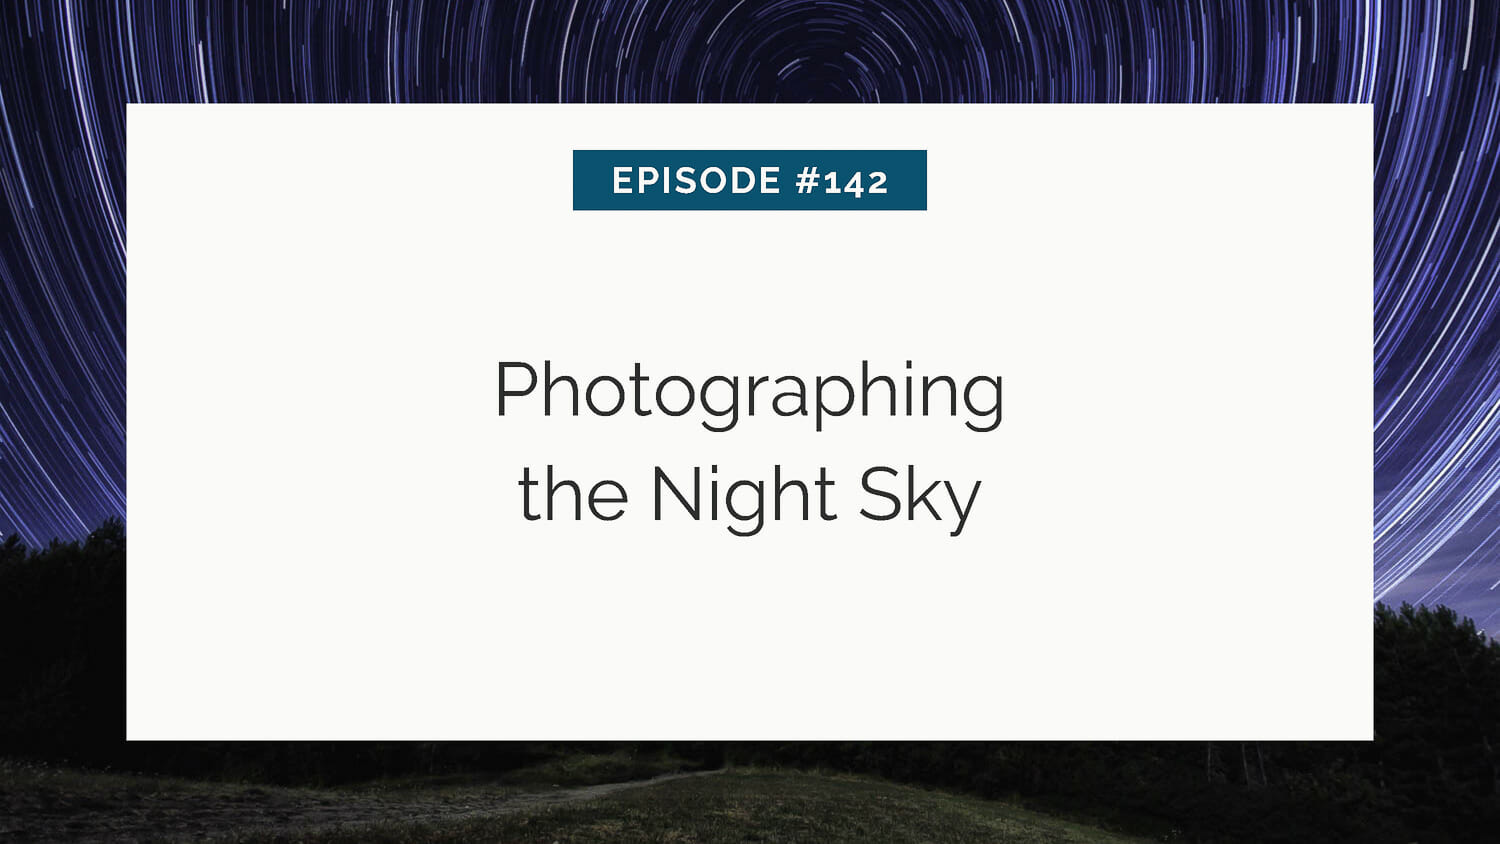 Episode #142: photographing the night sky – star trails over a dark landscape.